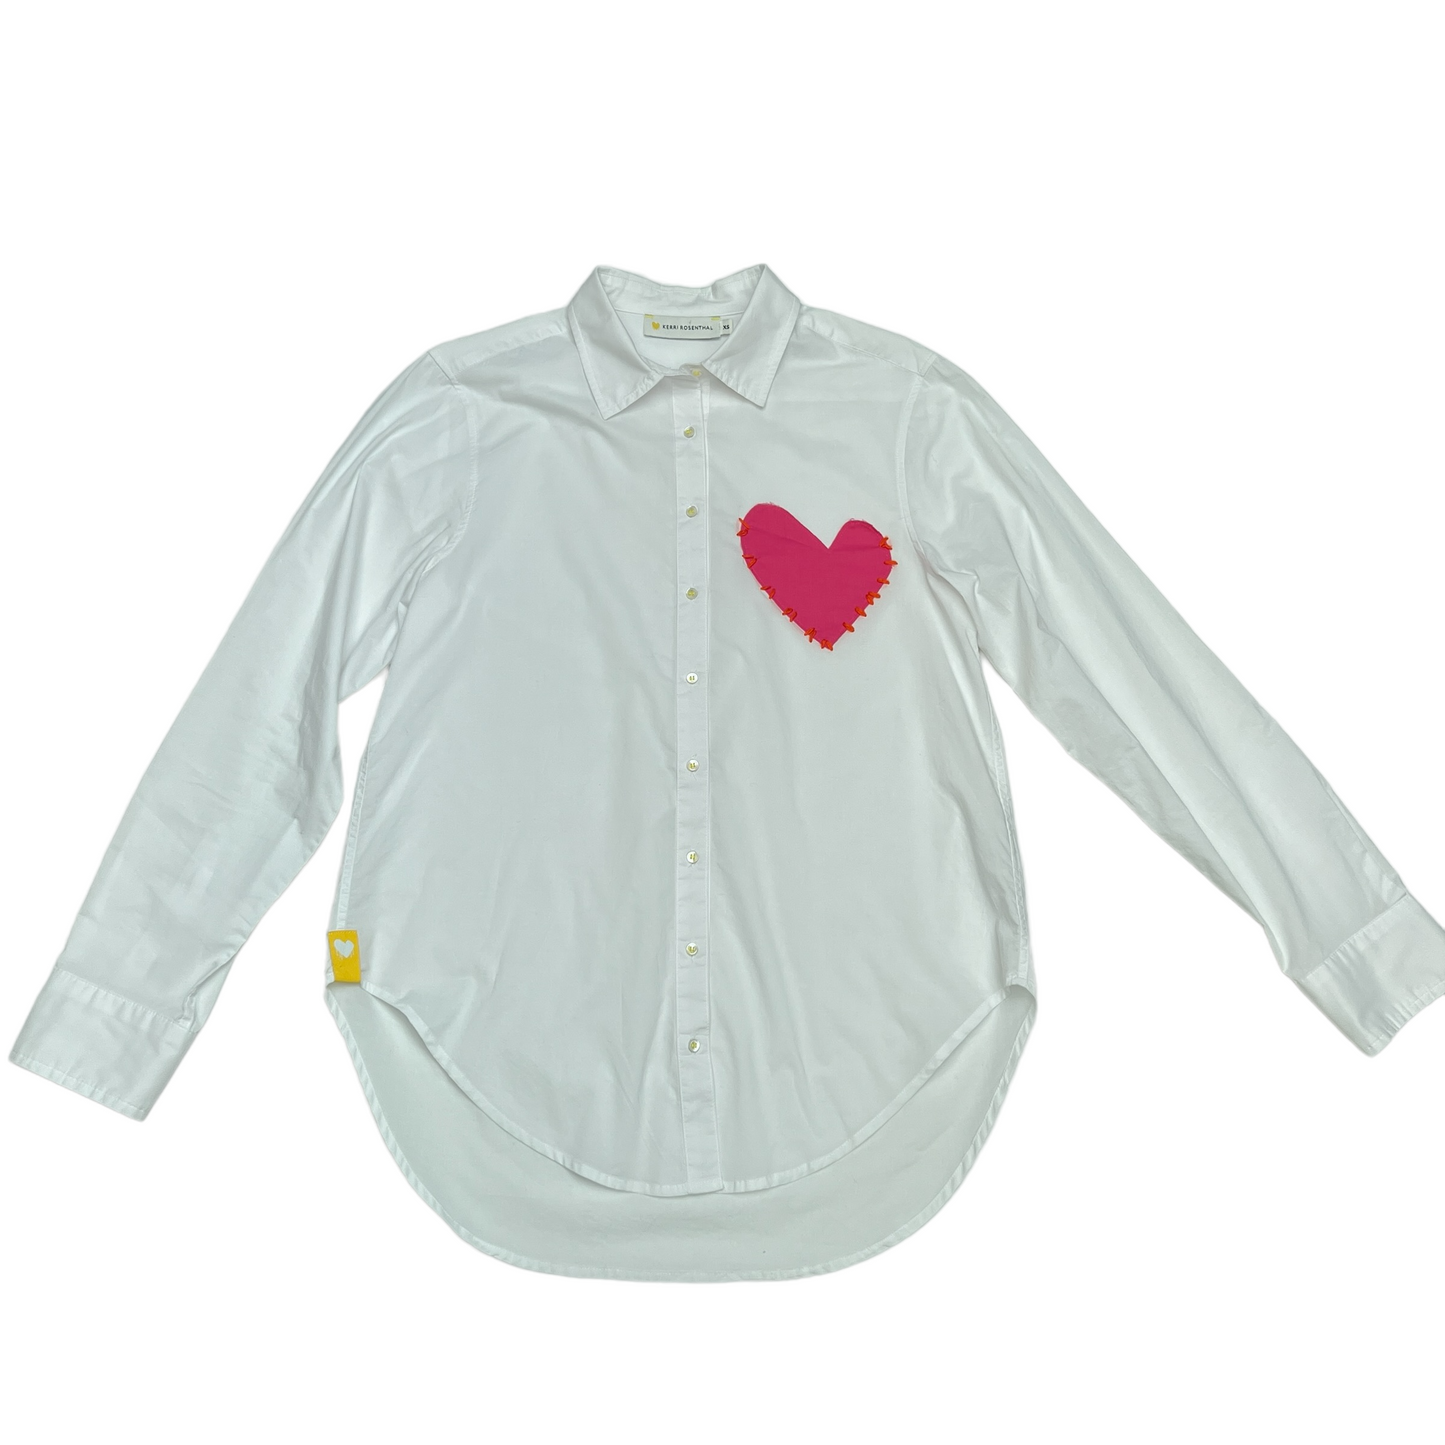 White Shirt with Heart - XS